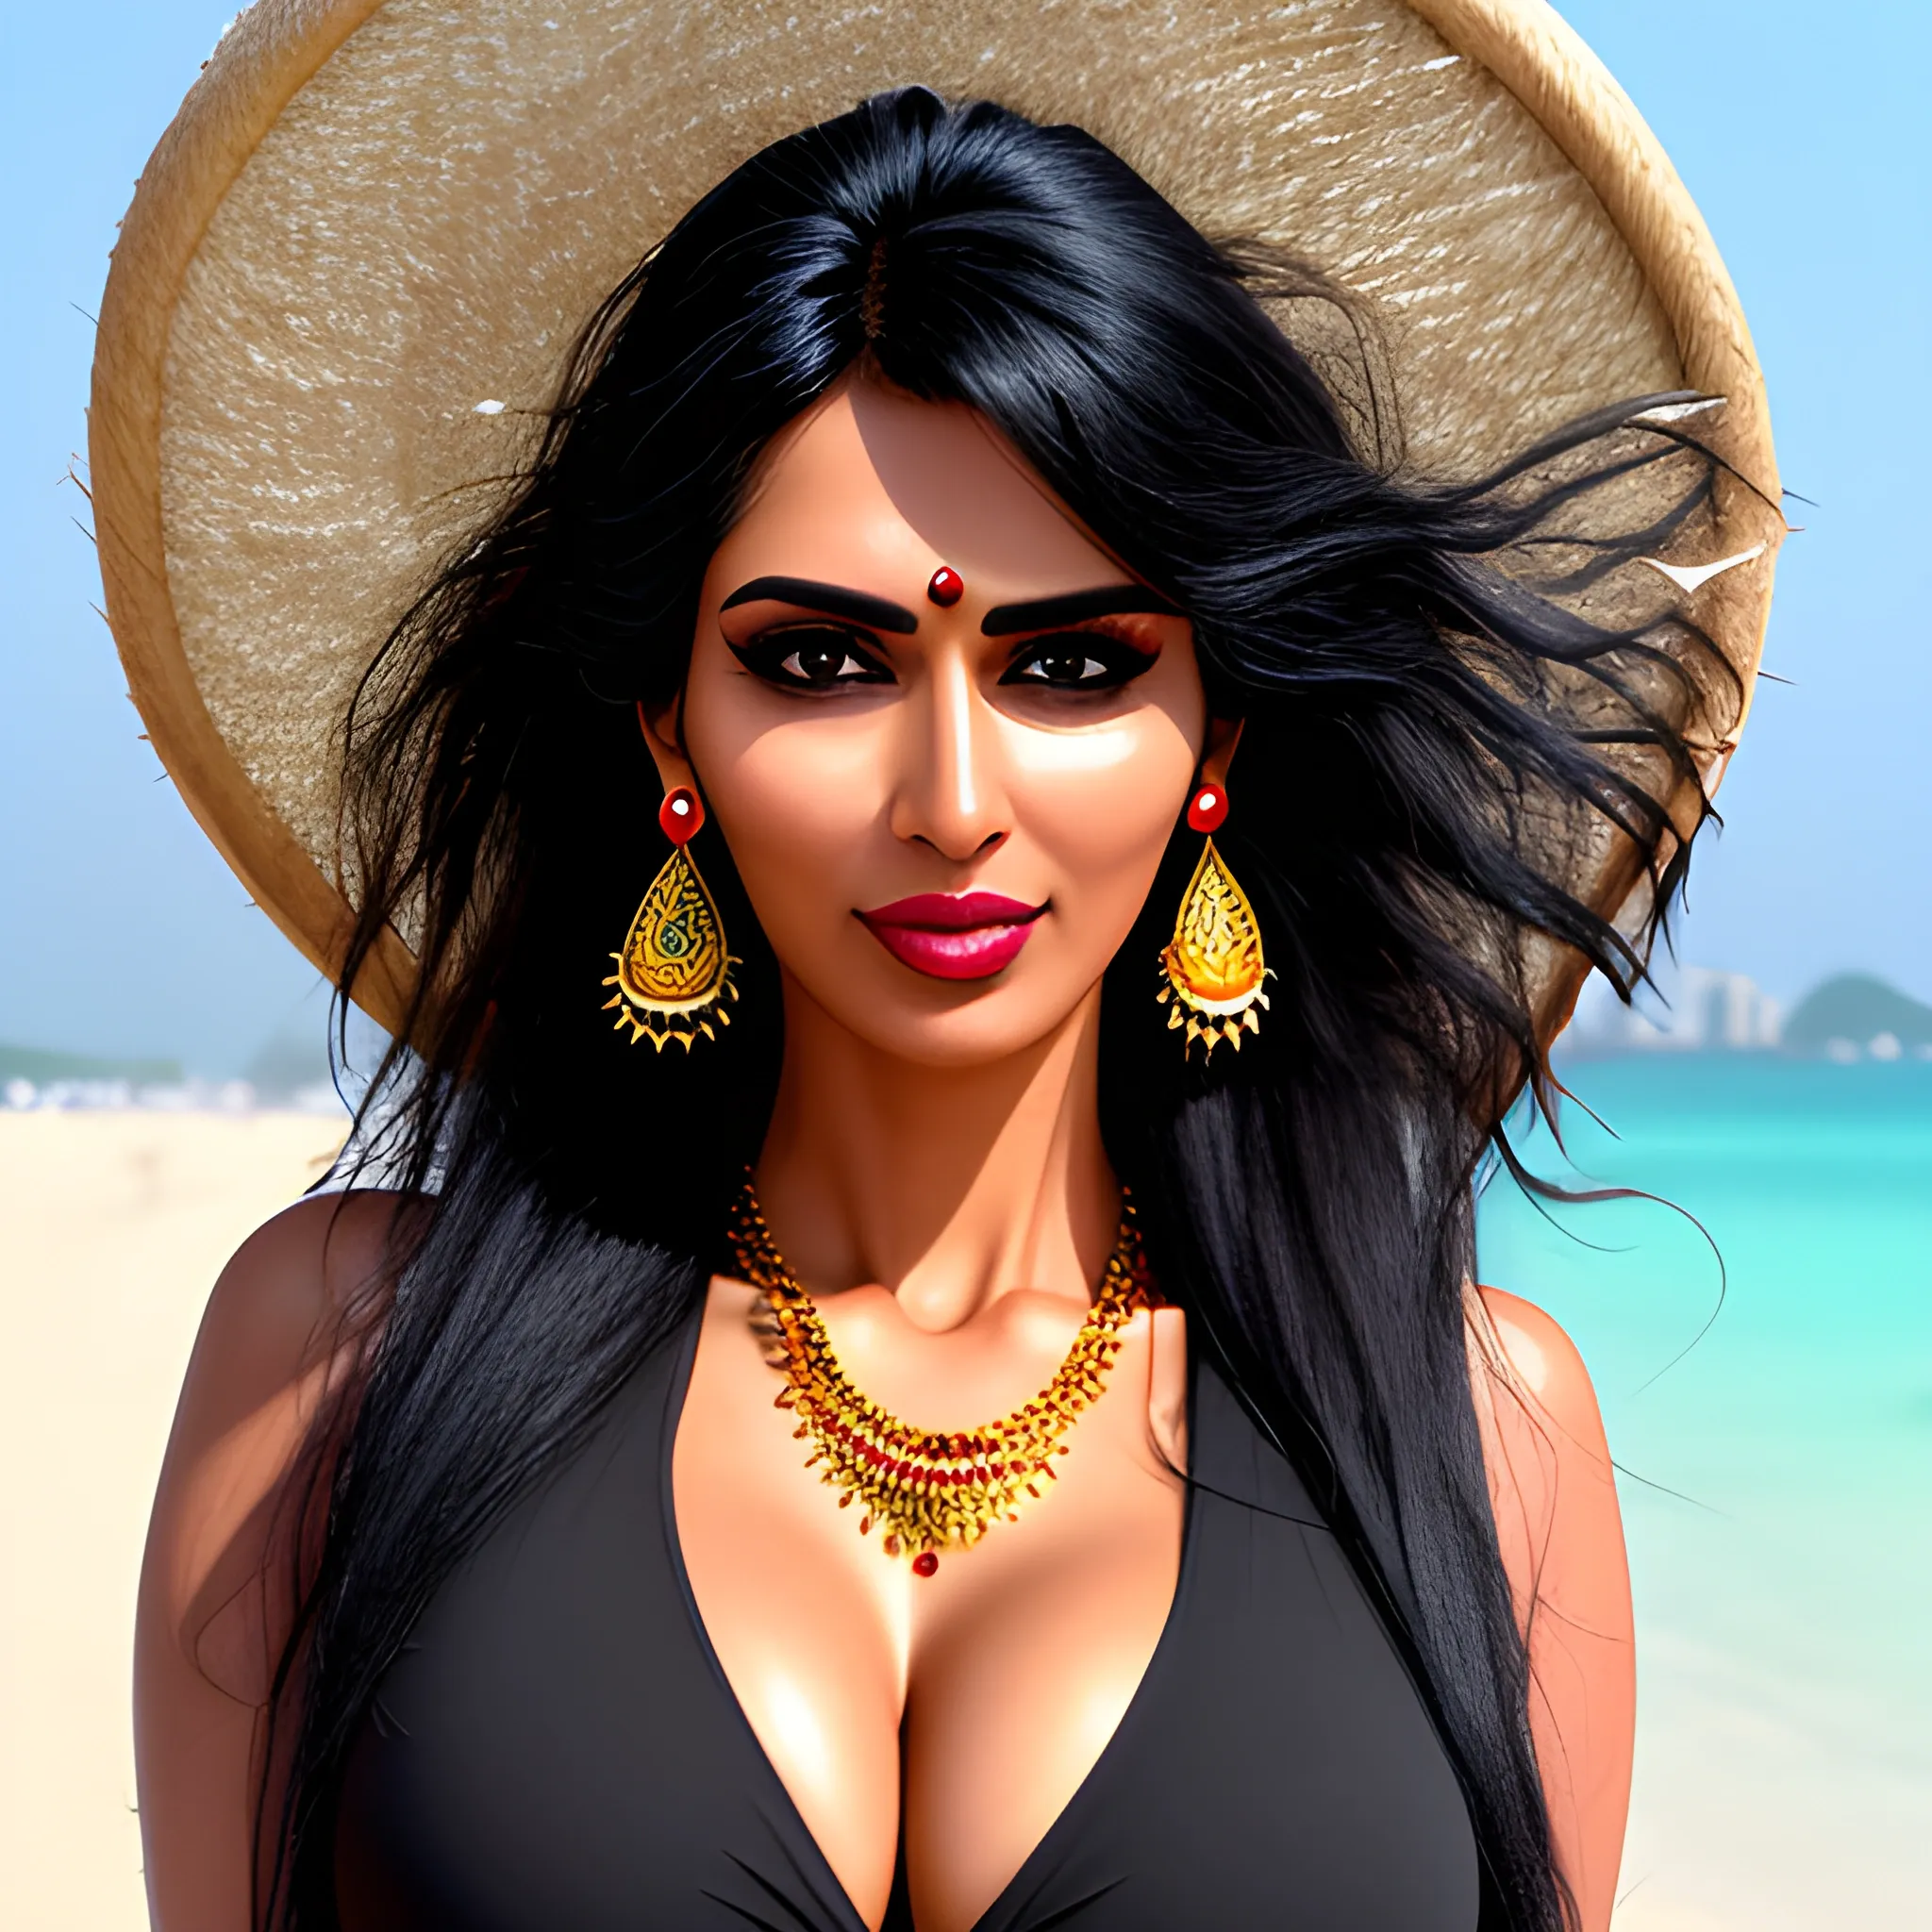 good hand, 4k, best quality, indian cute girl, in the workplace, beach outfit, sweaty, sharp focus, soft lighting, skinny, enormous, big bazooka, jewelry, earrings, long hair, black hair, extremely messy hair, full image